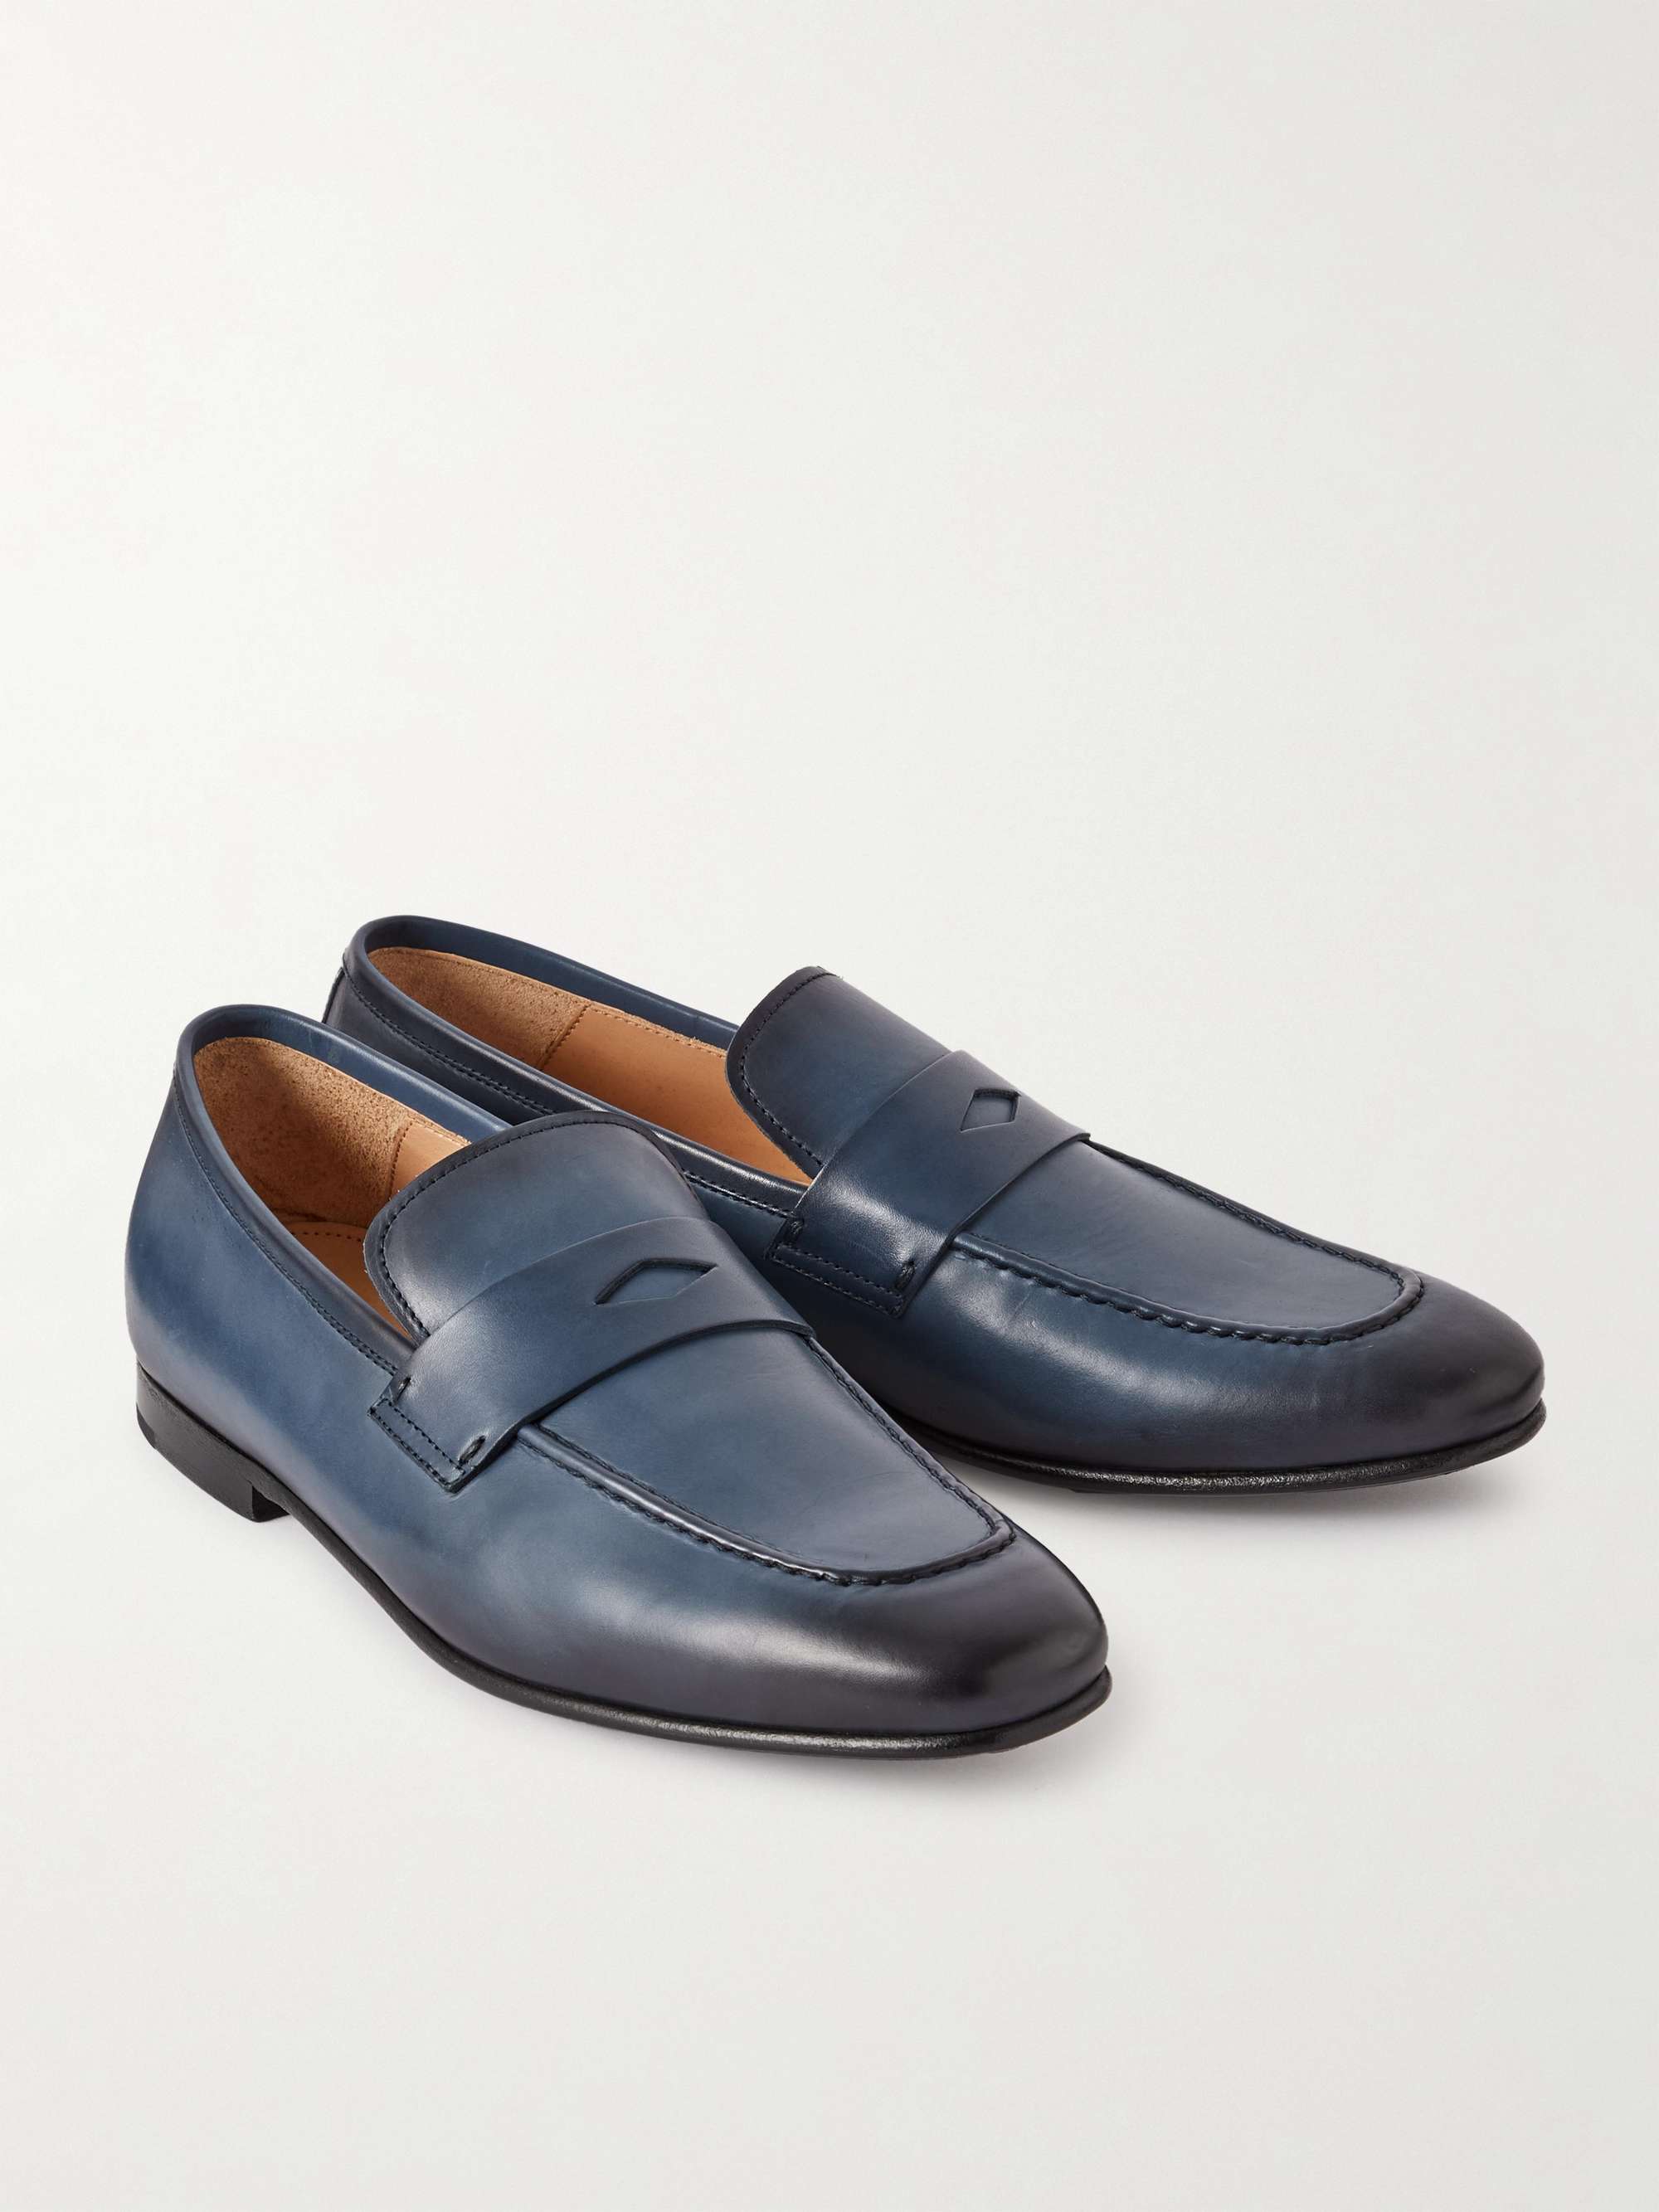 DUNHILL Chiltern Burnished-Leather Penny Loafers